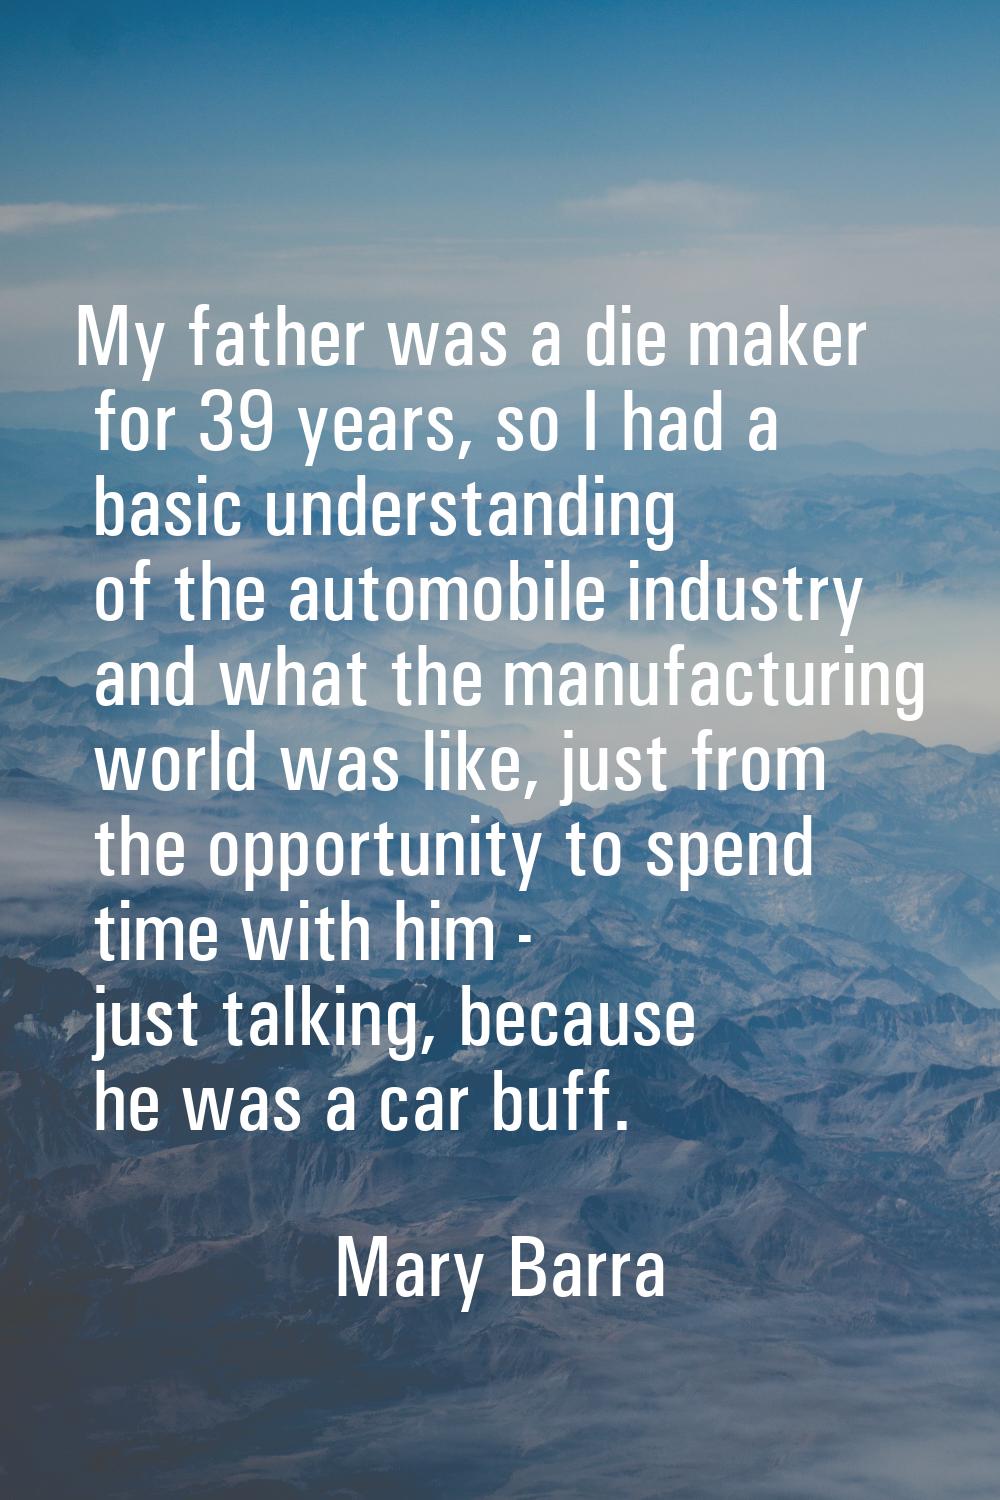 My father was a die maker for 39 years, so I had a basic understanding of the automobile industry a